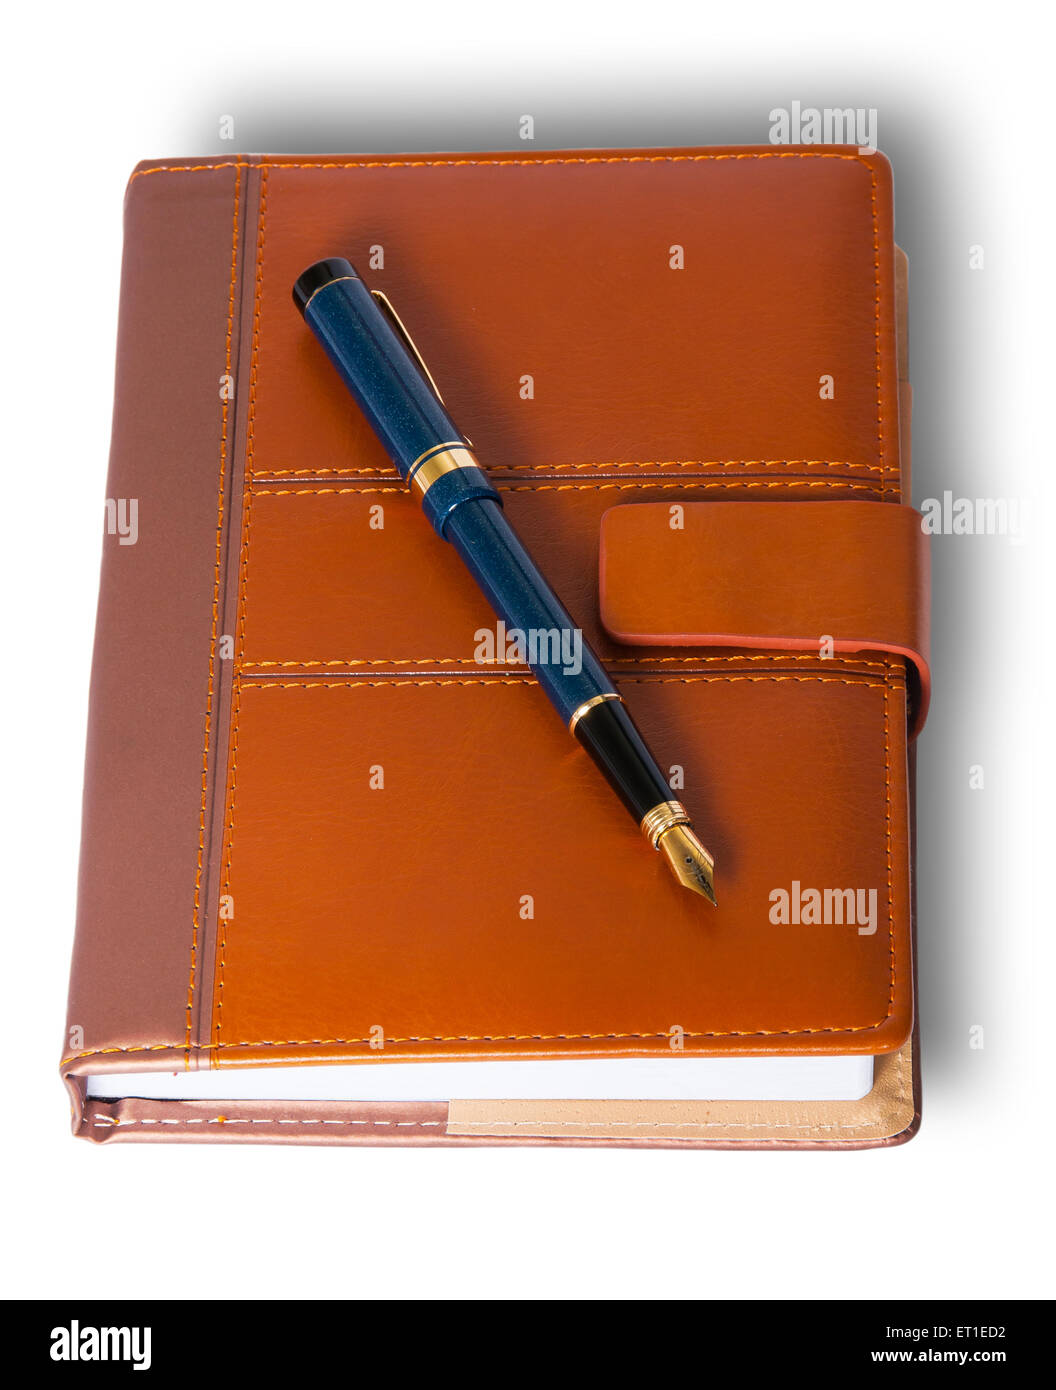 Fountain pen on top of the closed notebook isolated on white background Stock Photo